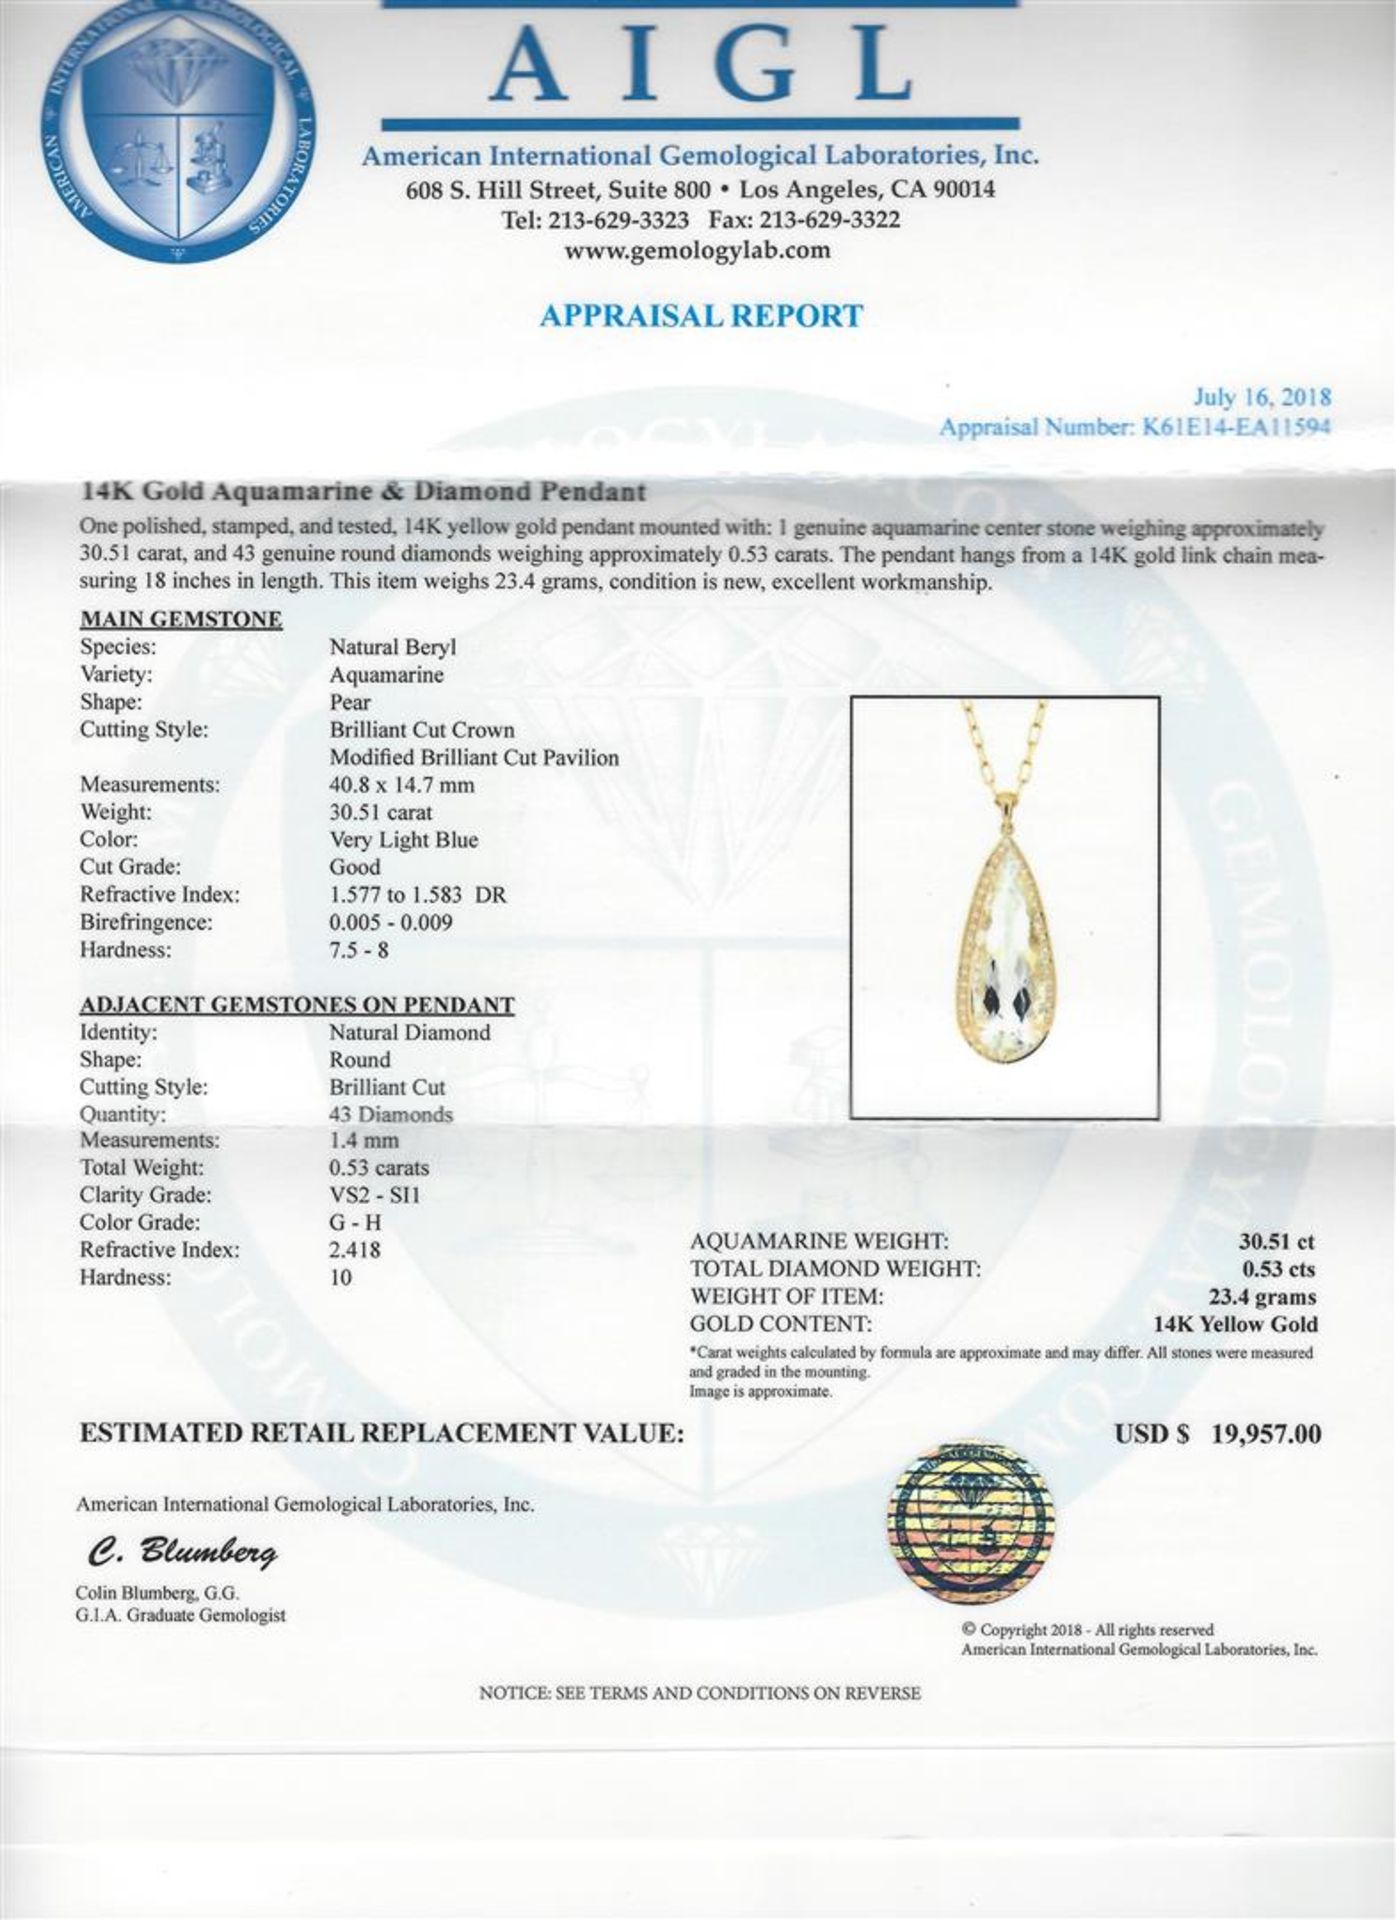 30.51 ctw Aquamarine and Diamond Pendant With Chain - 14KT Yellow Gold - Image 3 of 3